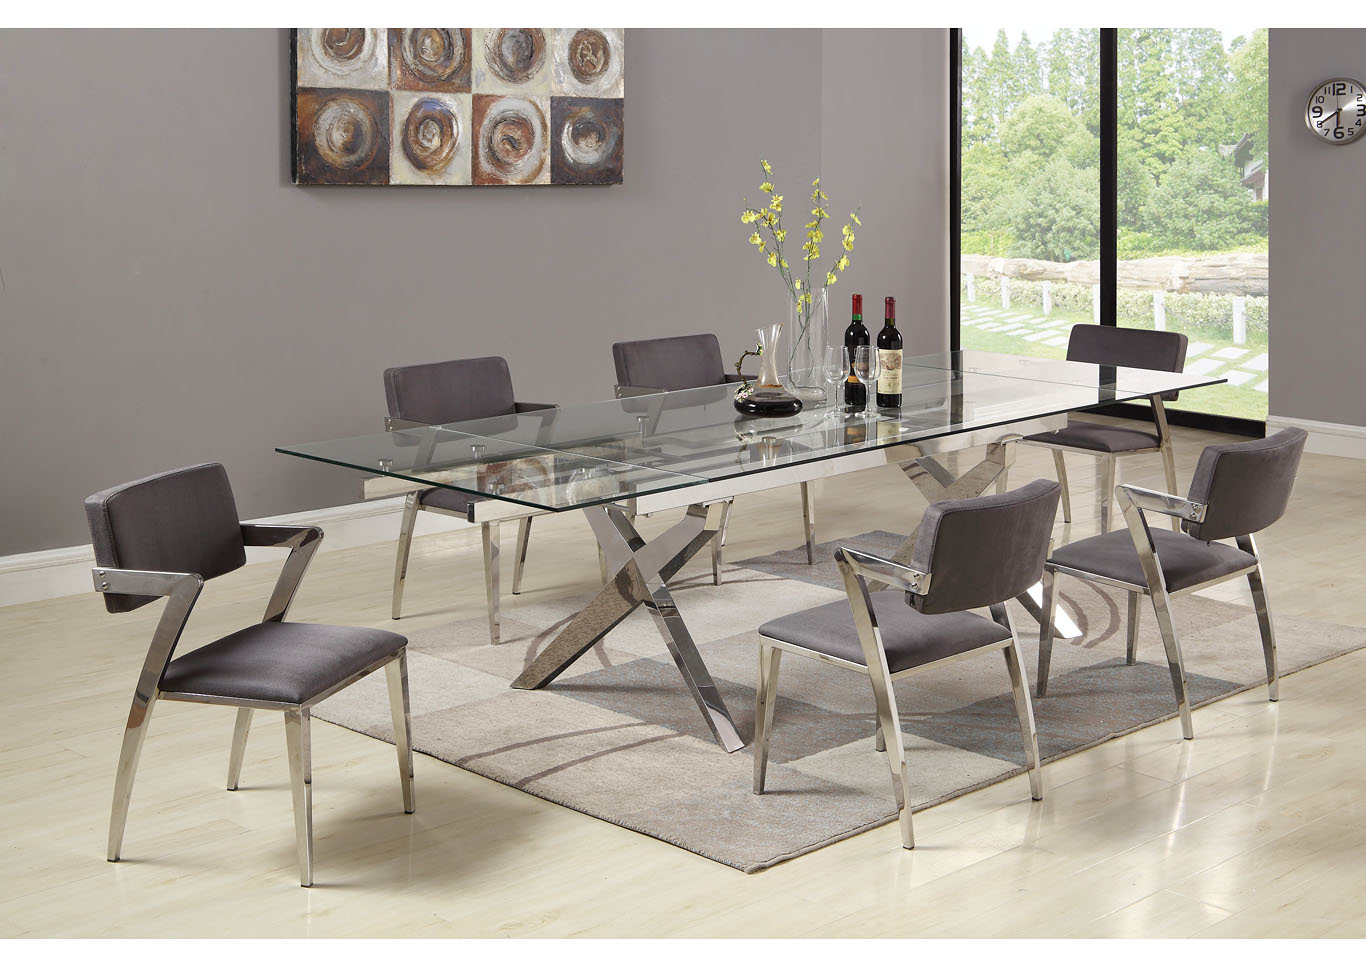 Paula Grey Rectangular Glass Top 7 Piece Dining Set W/ 6 Arm Chairs,Chintaly Imports